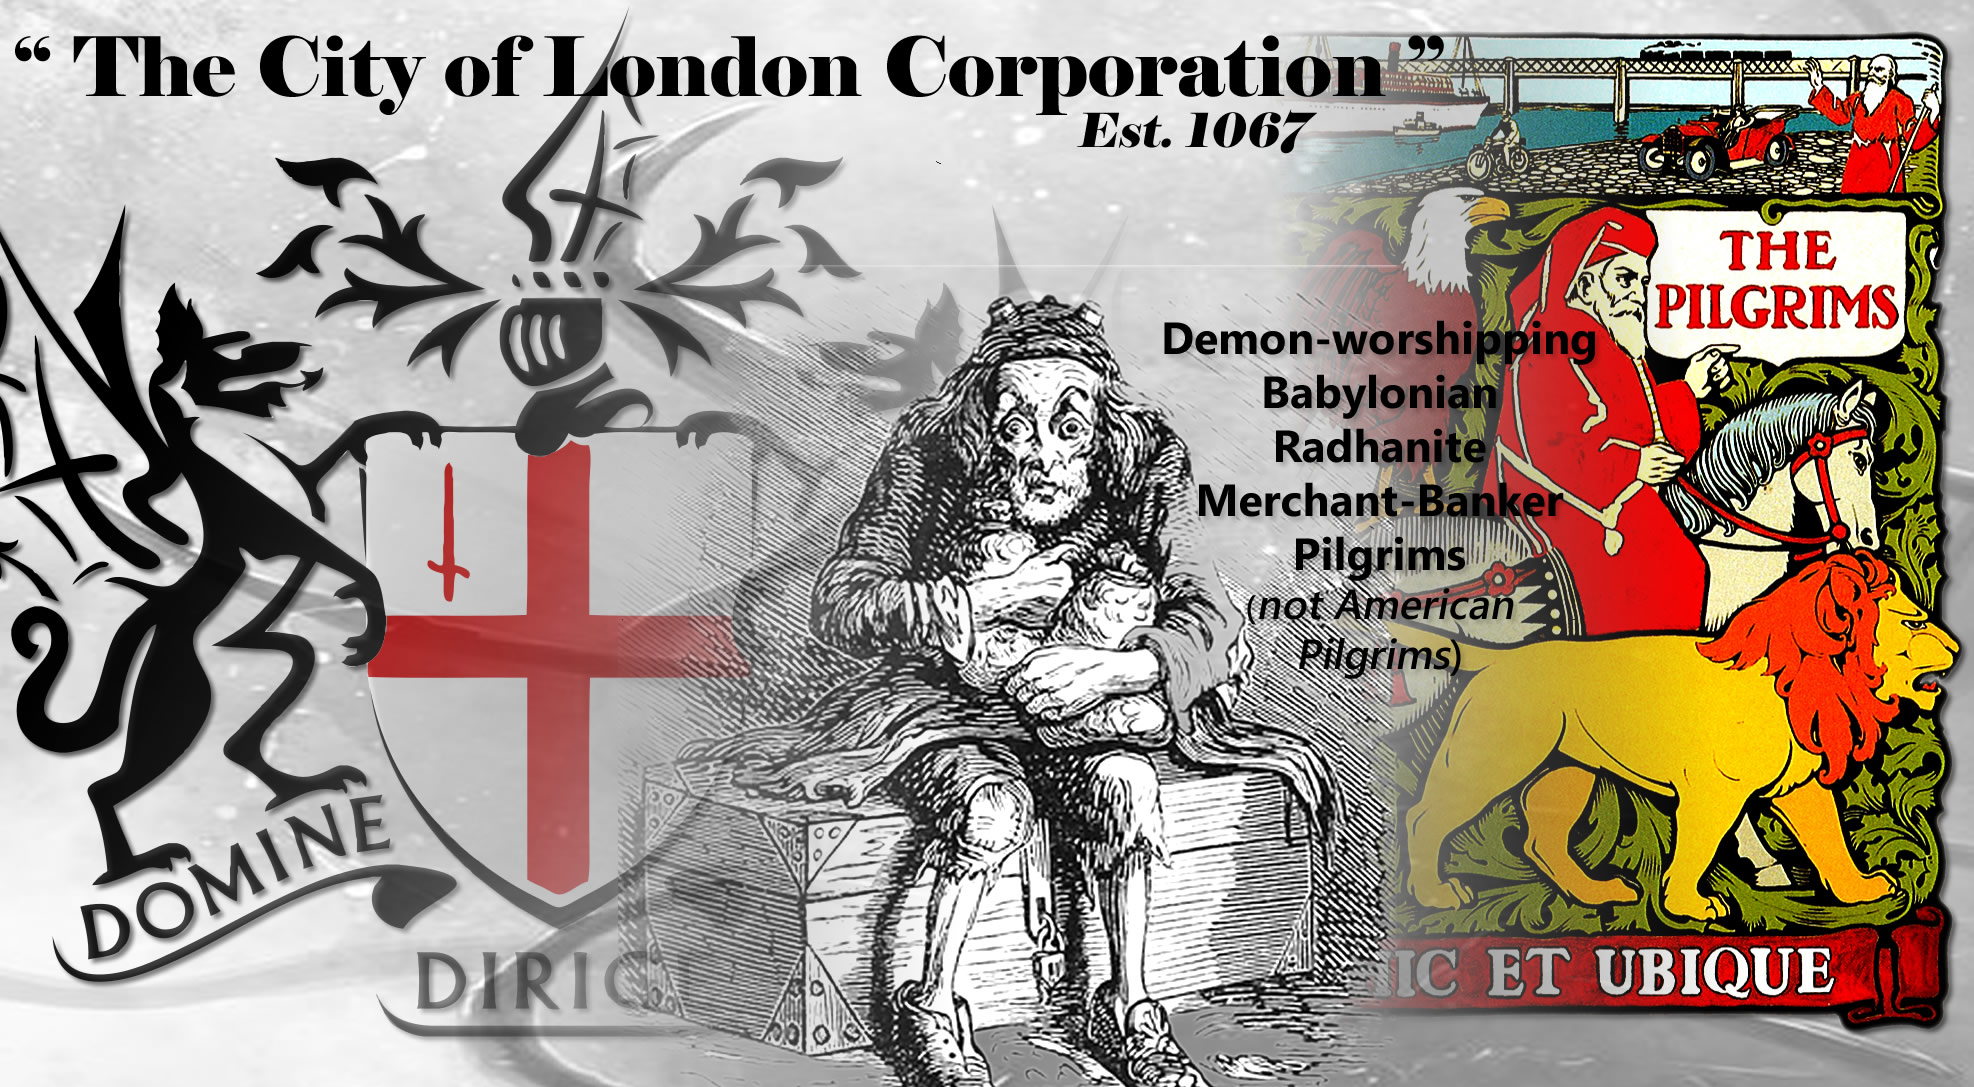 THE CITY OF LONDON BABYLONIAN RADHANITE MERCHANT-BANKER DEMON HOAX OF ALL TIME